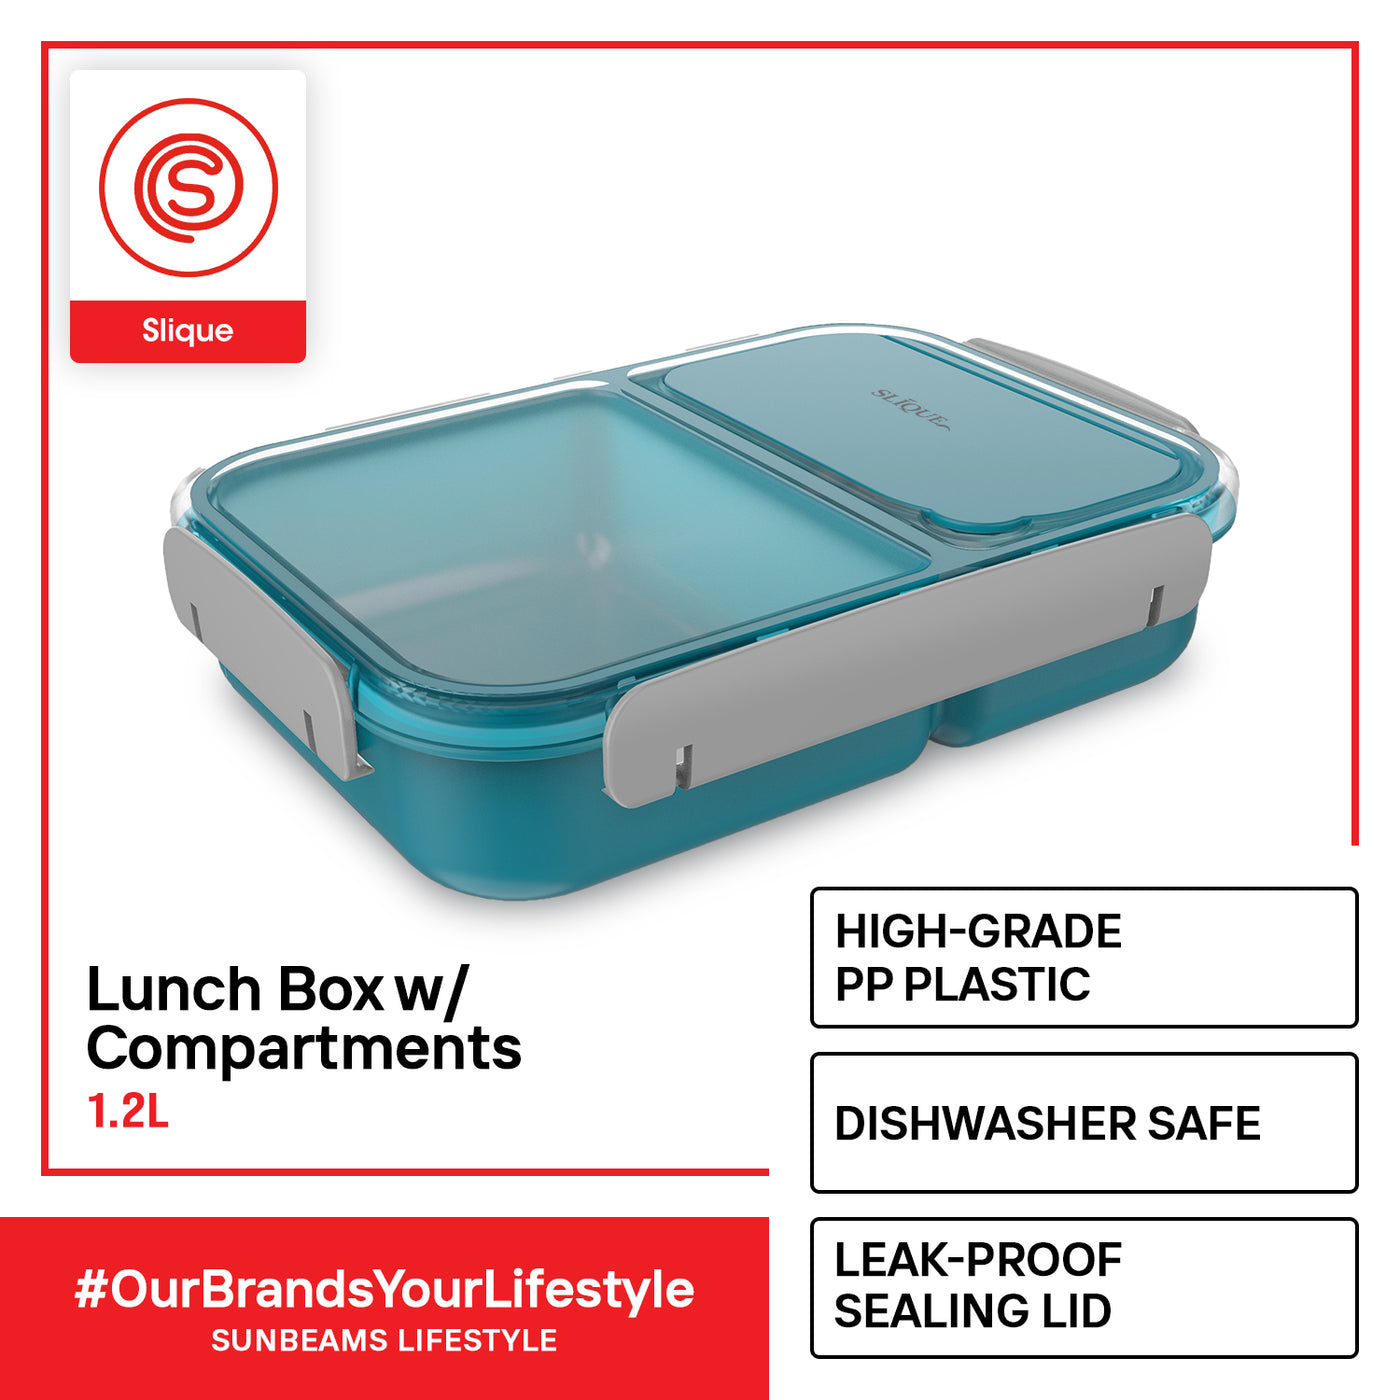 SLIQUE Premium Lunch Box w/ Compartments 1200ml|1.2L BPA Free Airtight Microwave Safe Amazing Gift Idea For Any Occasion! (Aqua Green)